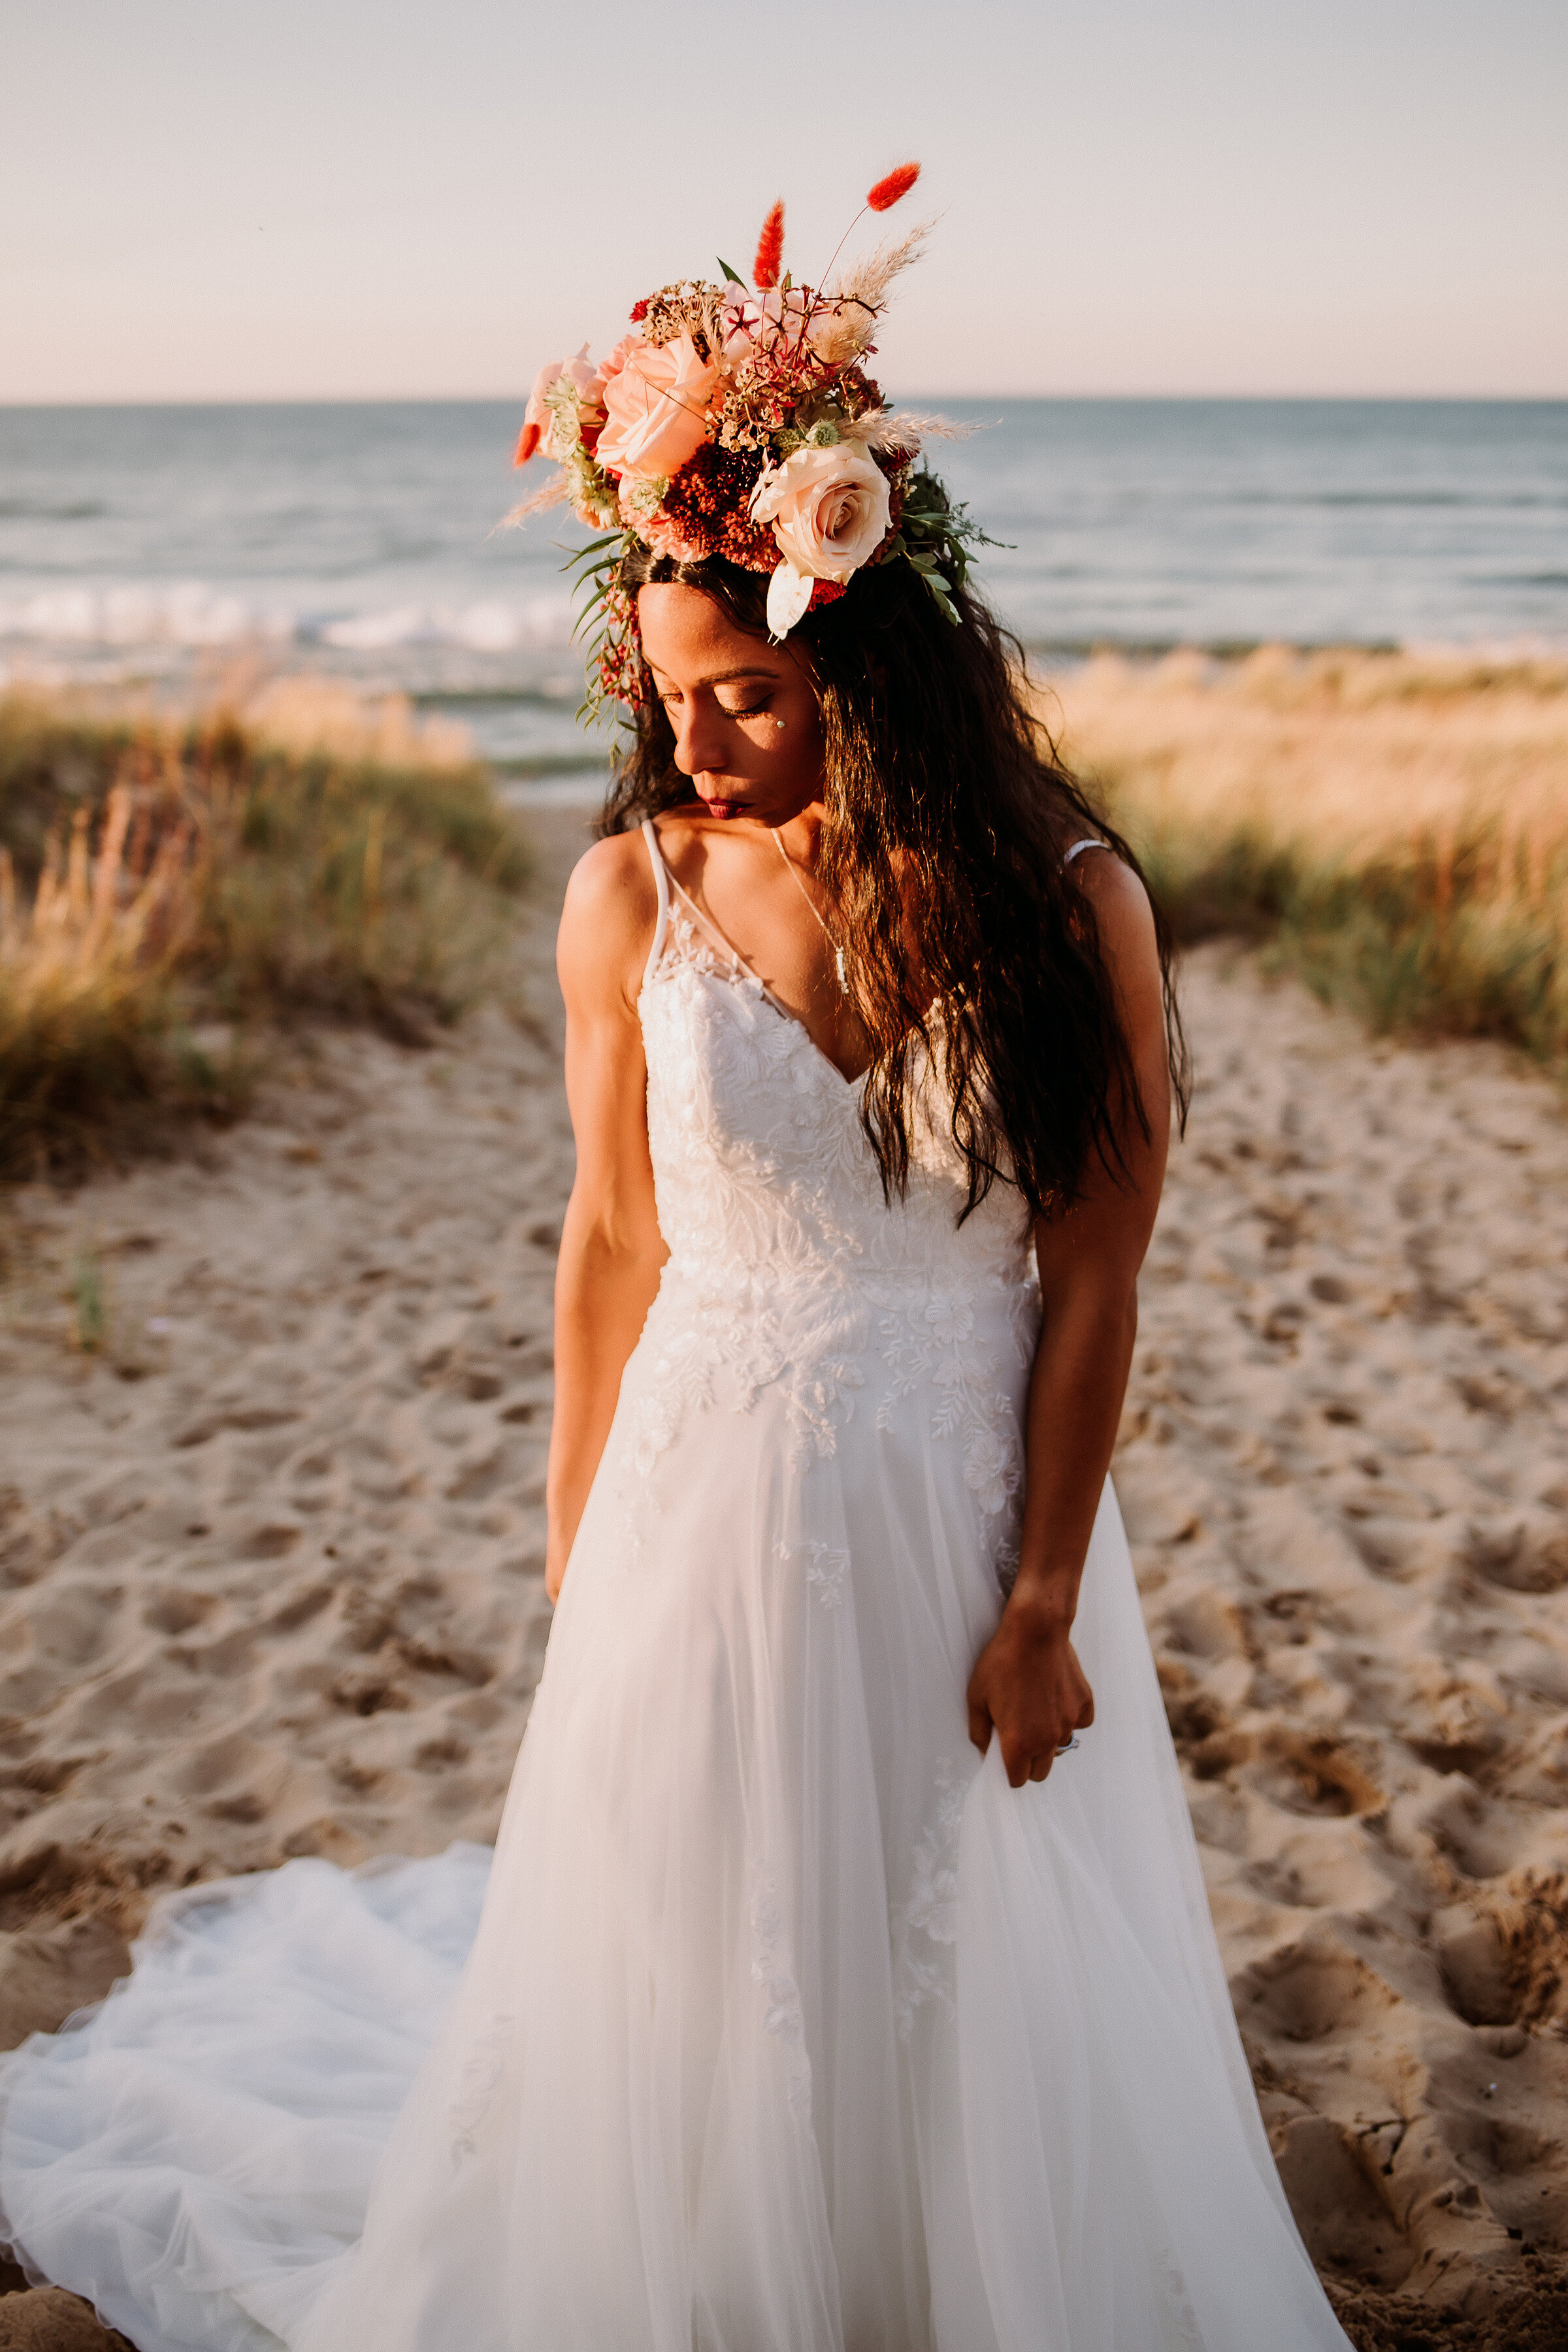  The most luscious boho floral headpiece crown for this adventurous bride at a styled elopement shoot in Indiana Dunes State Park near Valparaiso, Indiana. formals session on the beach professional midwest wedding photographer lake michigan beach sho